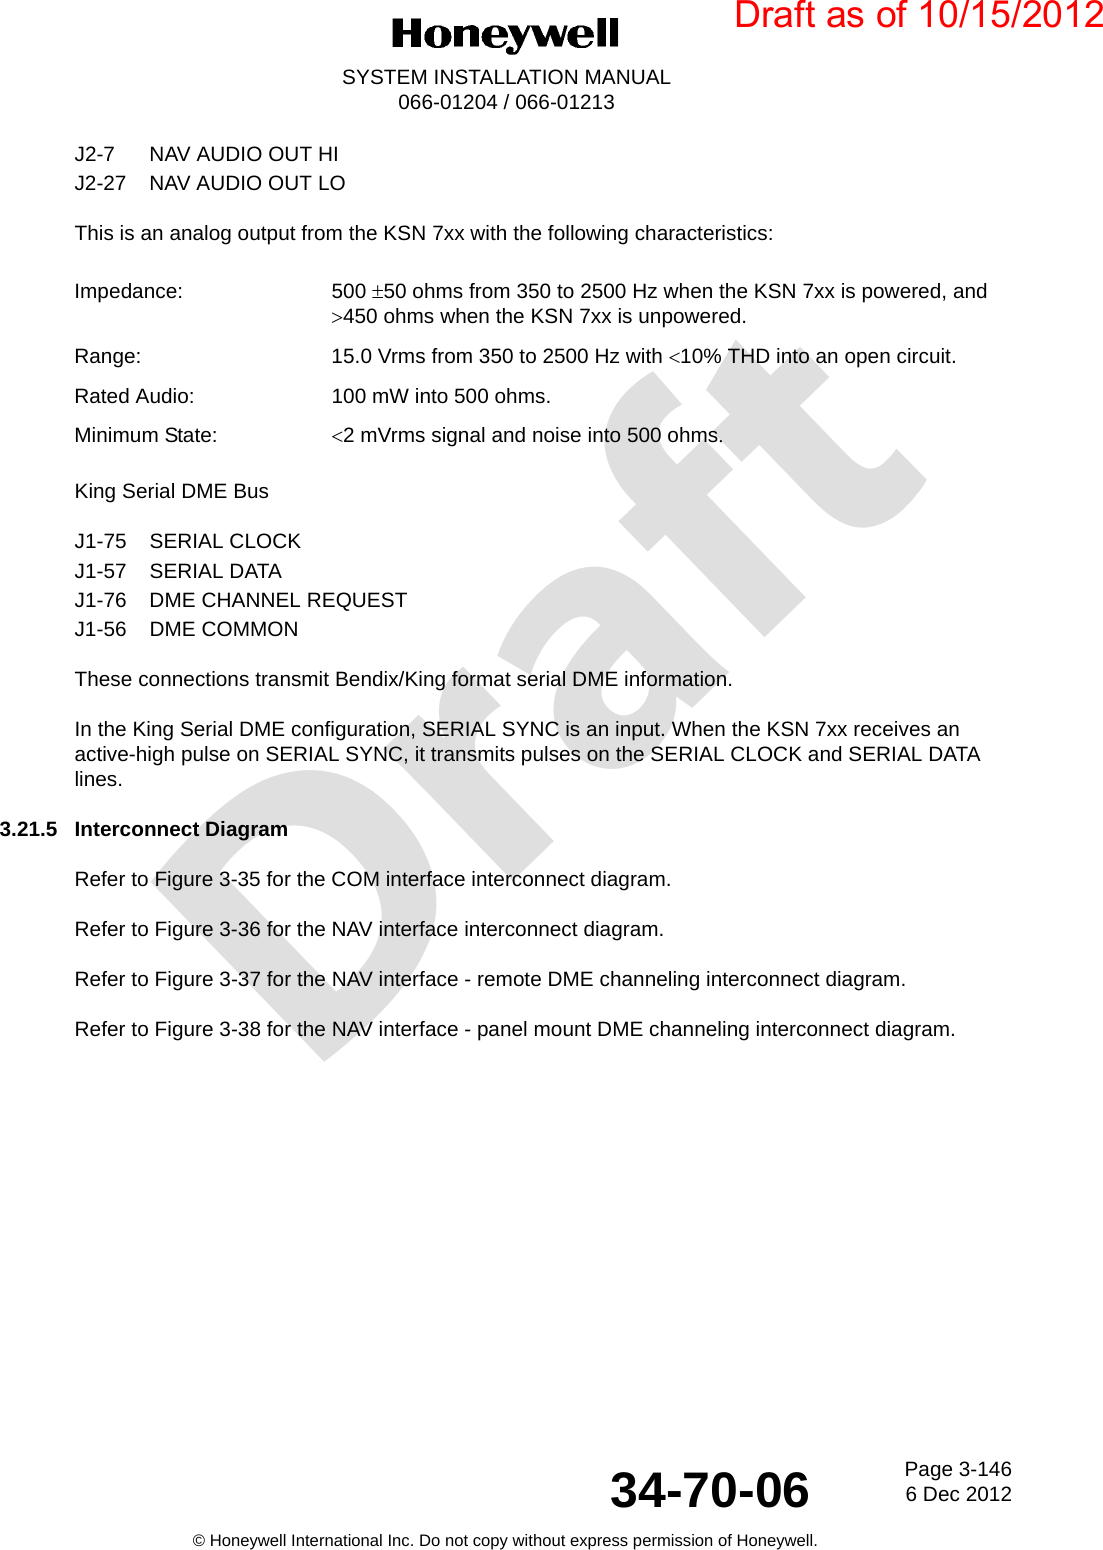 DraftPage 3-1466 Dec 201234-70-06SYSTEM INSTALLATION MANUAL066-01204 / 066-01213© Honeywell International Inc. Do not copy without express permission of Honeywell.J2-7 NAV AUDIO OUT HIJ2-27 NAV AUDIO OUT LOThis is an analog output from the KSN 7xx with the following characteristics:King Serial DME BusJ1-75 SERIAL CLOCKJ1-57 SERIAL DATAJ1-76 DME CHANNEL REQUESTJ1-56 DME COMMONThese connections transmit Bendix/King format serial DME information.In the King Serial DME configuration, SERIAL SYNC is an input. When the KSN 7xx receives an active-high pulse on SERIAL SYNC, it transmits pulses on the SERIAL CLOCK and SERIAL DATA lines.3.21.5 Interconnect DiagramRefer to Figure 3-35 for the COM interface interconnect diagram.Refer to Figure 3-36 for the NAV interface interconnect diagram.Refer to Figure 3-37 for the NAV interface - remote DME channeling interconnect diagram.Refer to Figure 3-38 for the NAV interface - panel mount DME channeling interconnect diagram.Impedance: 500 50 ohms from 350 to 2500 Hz when the KSN 7xx is powered, and 450 ohms when the KSN 7xx is unpowered.Range: 15.0 Vrms from 350 to 2500 Hz with 10% THD into an open circuit.Rated Audio: 100 mW into 500 ohms.Minimum State: 2 mVrms signal and noise into 500 ohmsDraft as of 10/15/2012